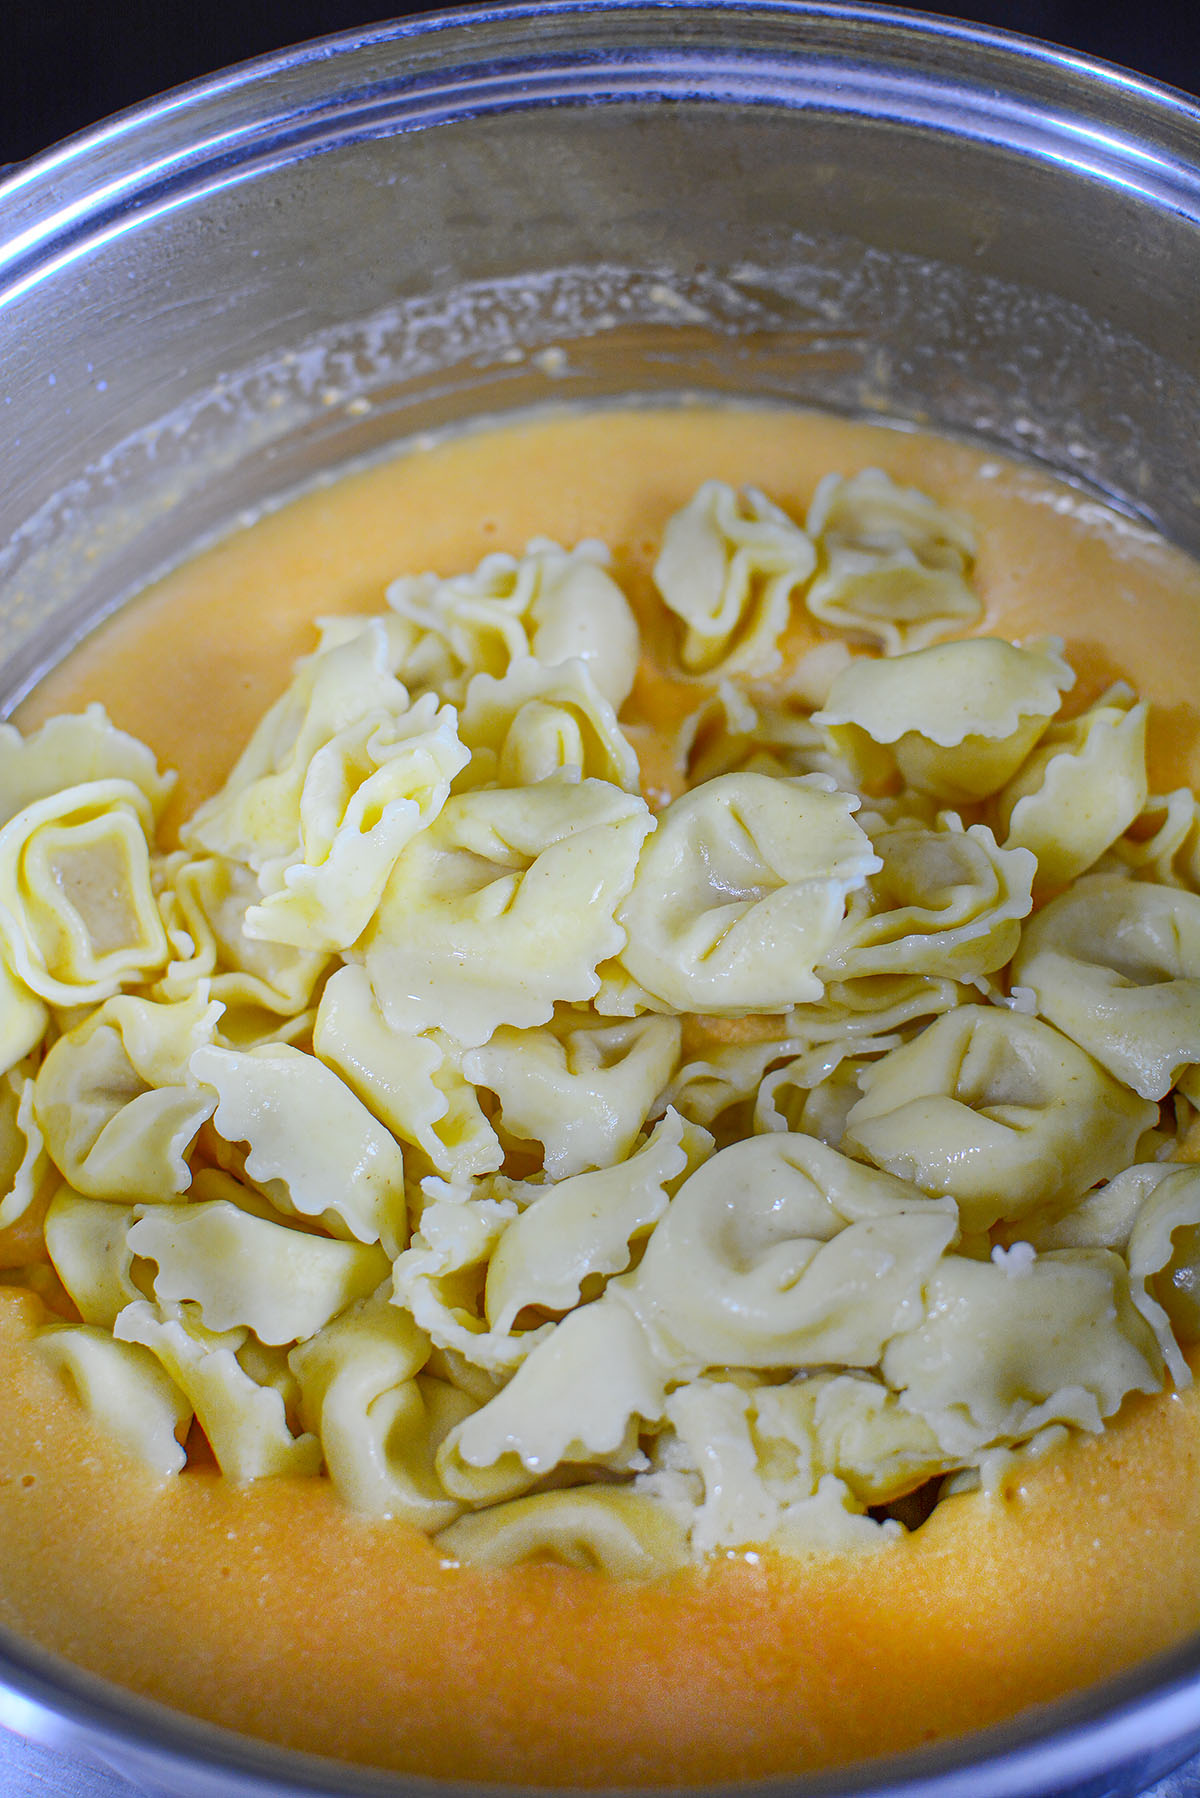 Adding cooked tortellini to the cheese sauce.